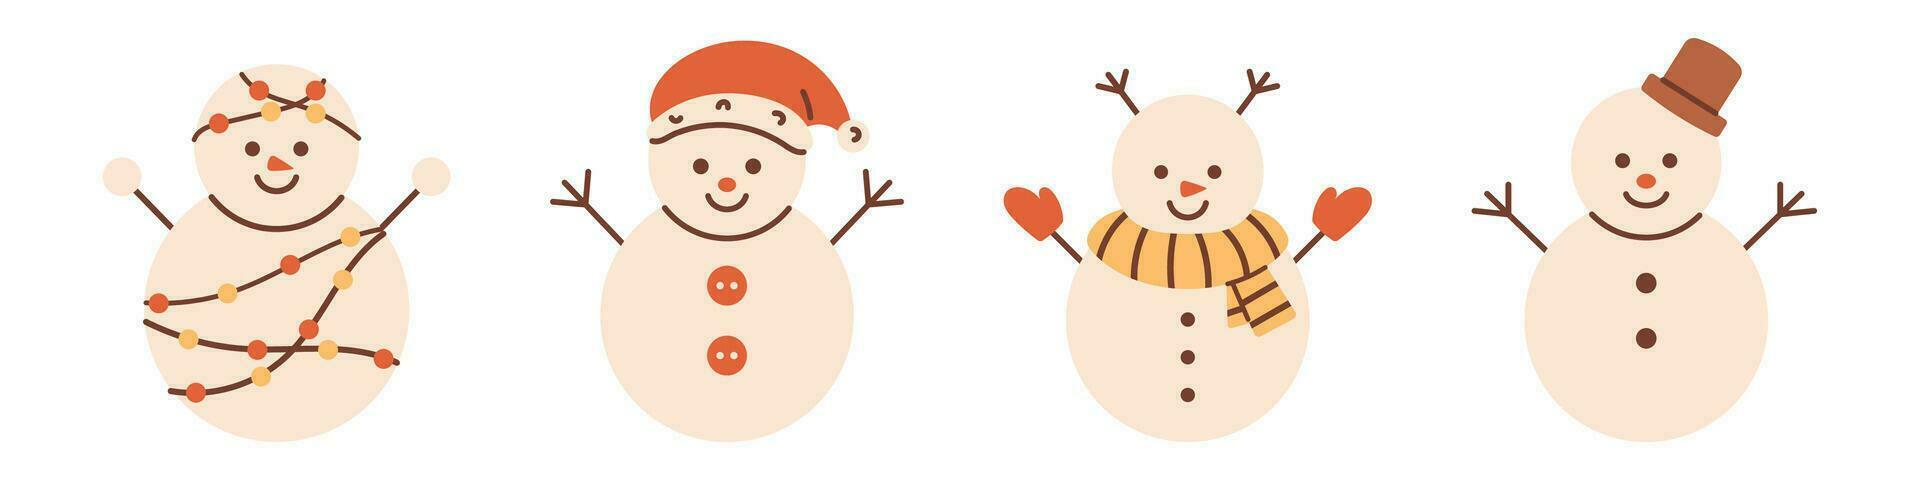 Vector cute smiling snowman set. Christmas funny snowman characters in clothes. Collection of winter snowman wearing hat and scarf.